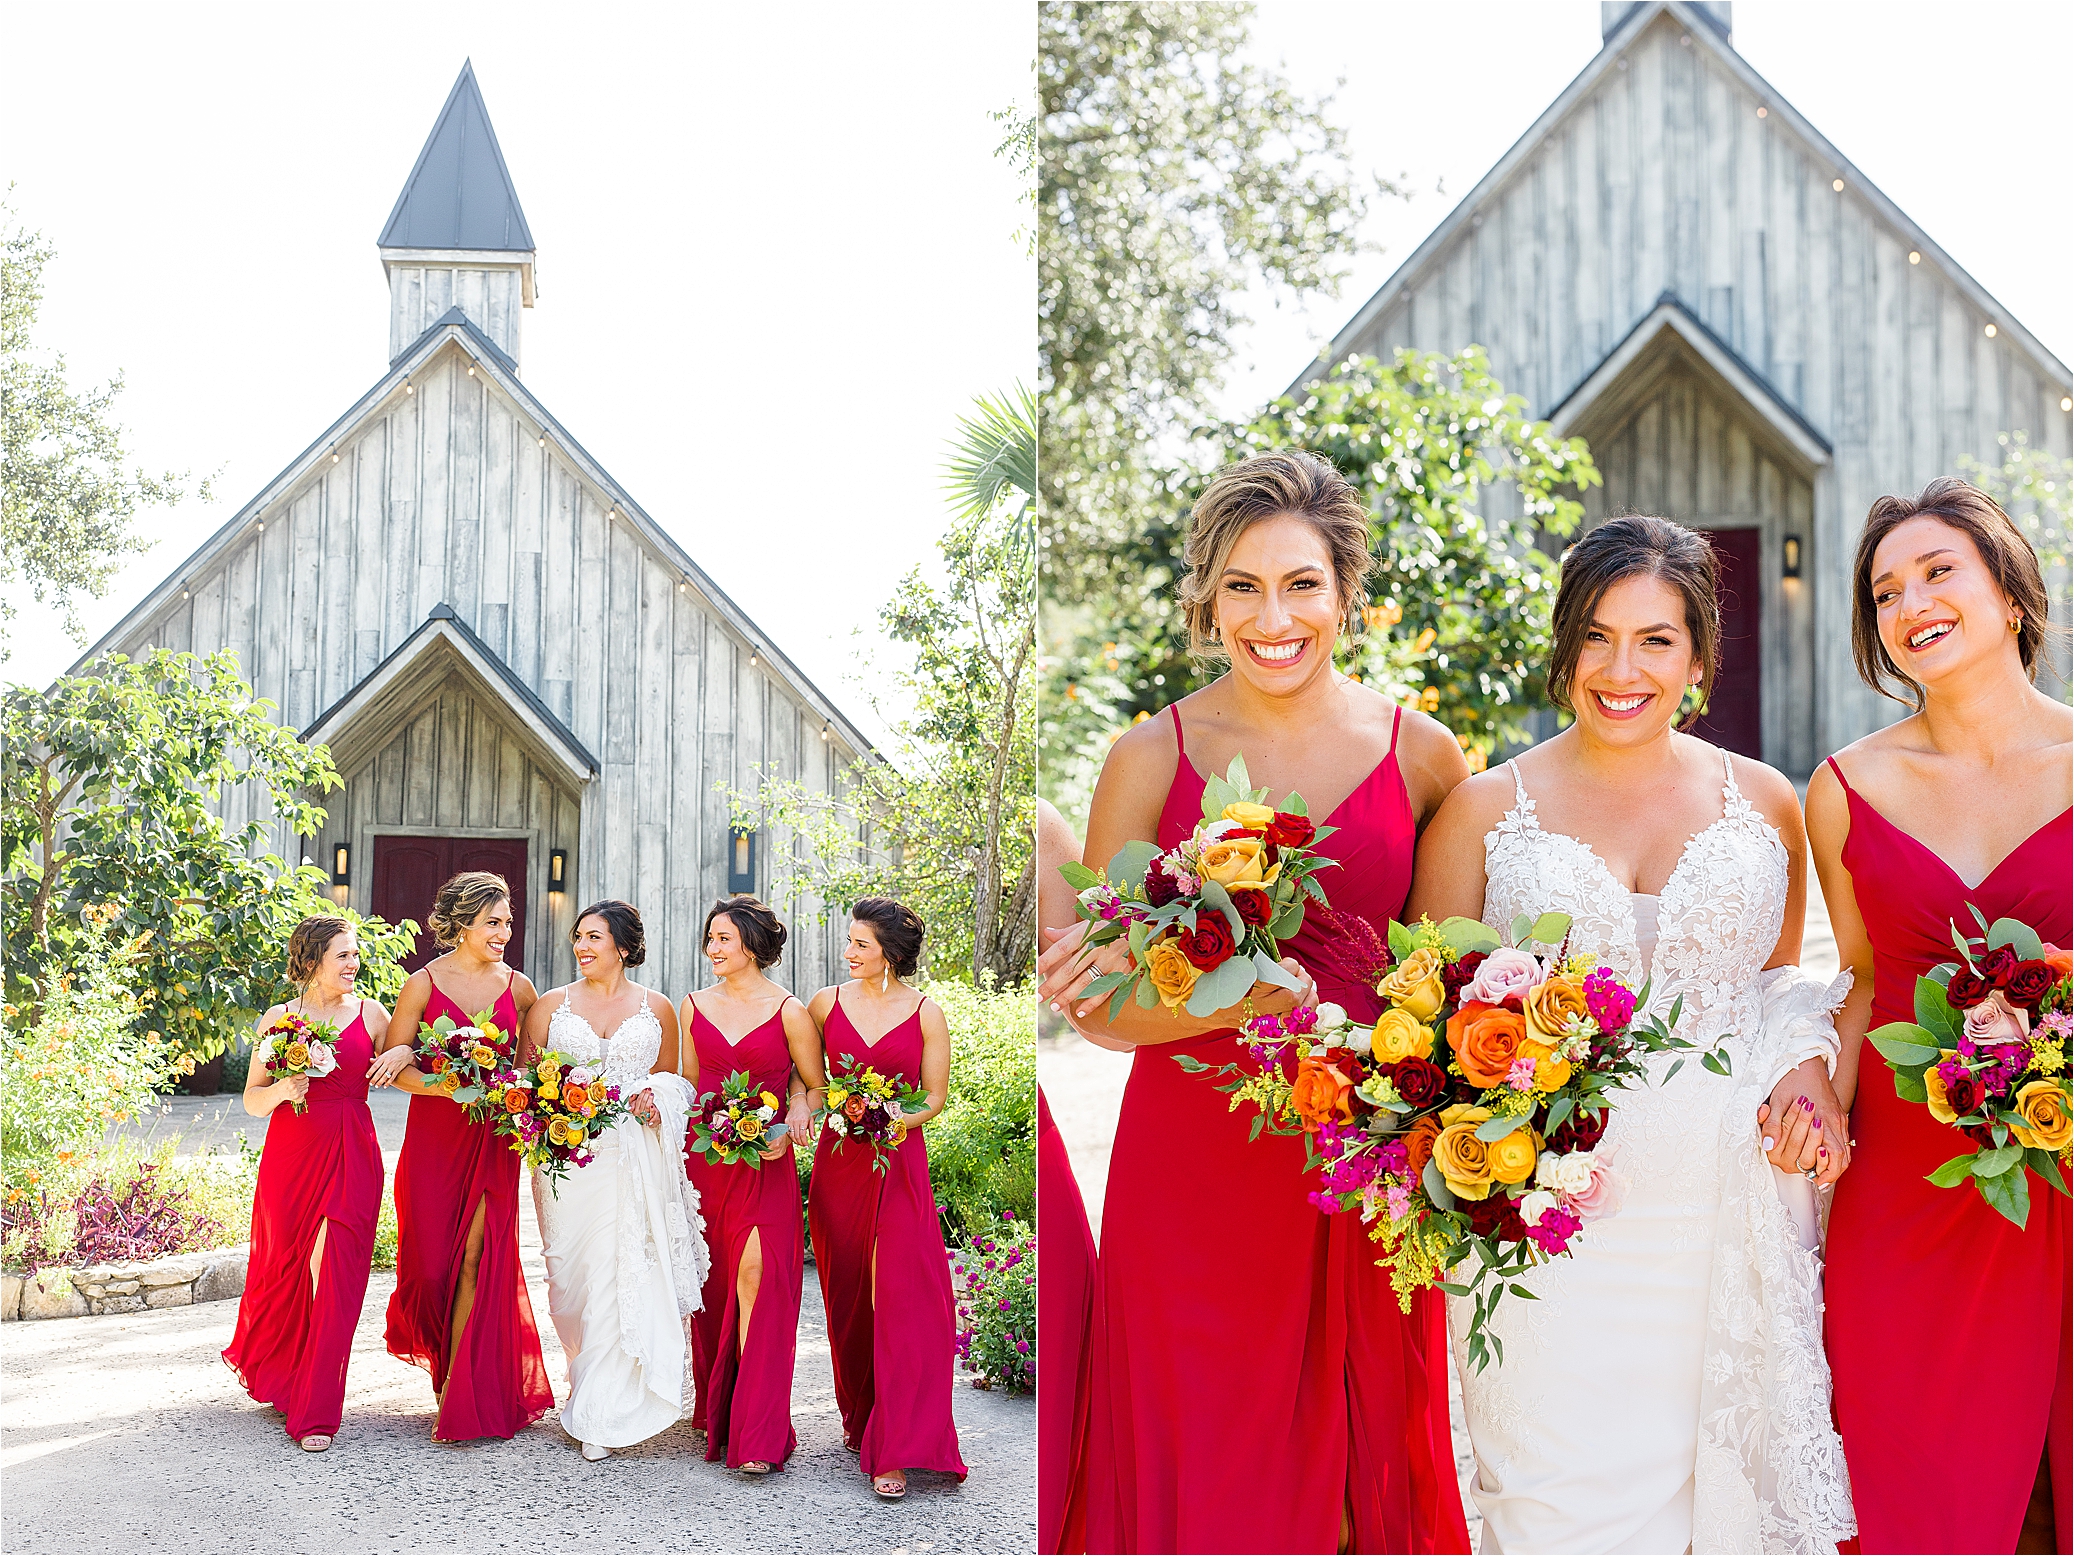 Bridesmaids hold hands and walk during wedding day portraits at Paniolo Ranch in Boerne, Texas